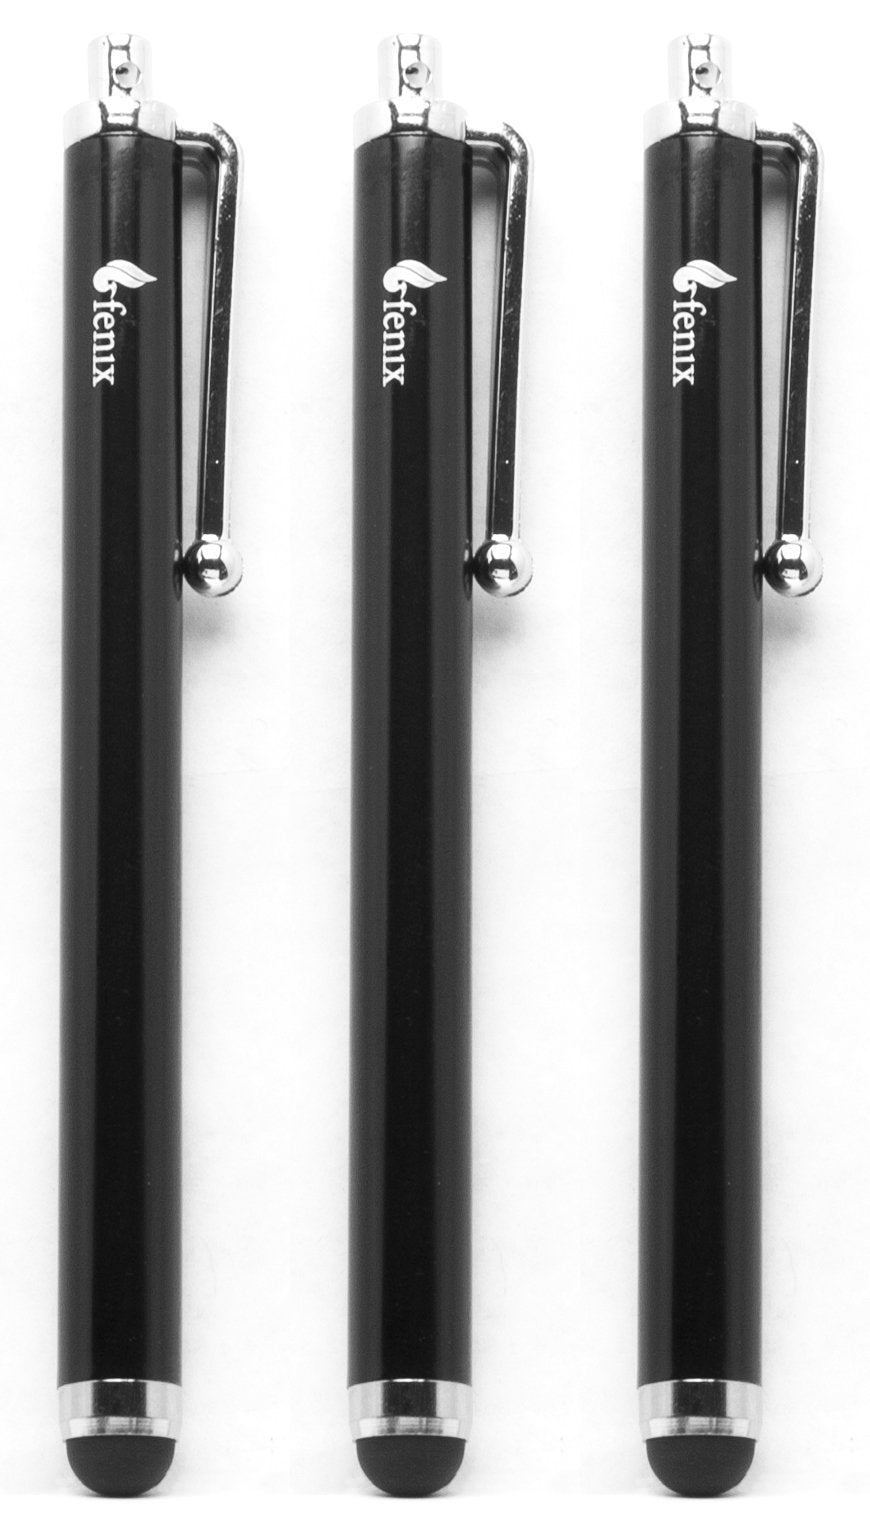 [Australia - AusPower] - Fenix - Pack of Three Black Universal Stylus Pen with Matching Black Soft Rubber Tip for iPhone 4/5/5c/6/6+, iPad/iPad Air/iPad Mini, Samsung Galaxy S4/S5/S6/Edge, Kindle Fire, Surface Pro and Much More 